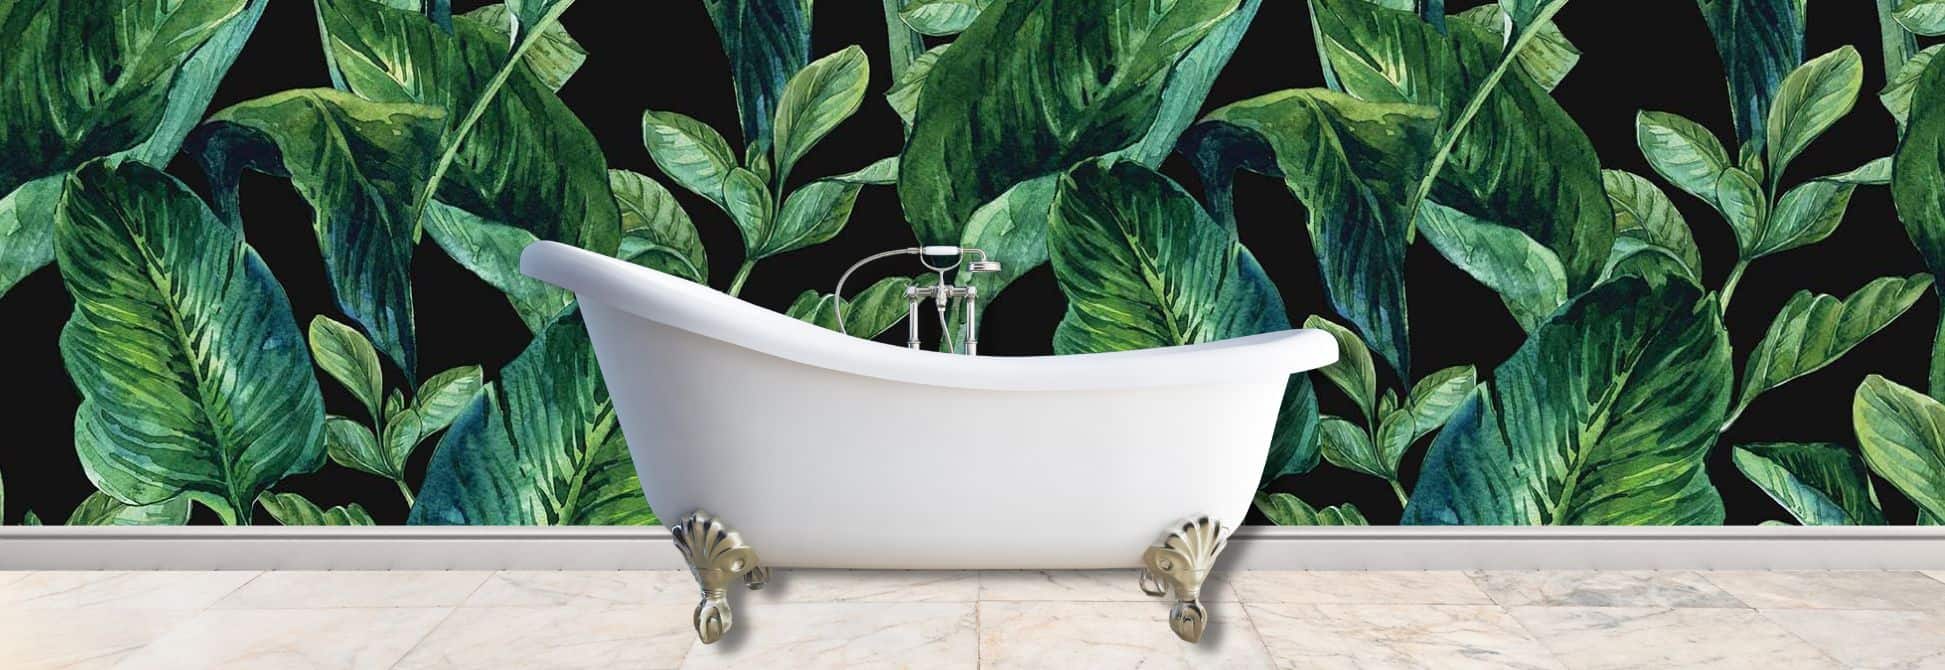 Shop Leaf Wallpaper, like this dark tropical design in a bathroom, from About Murals